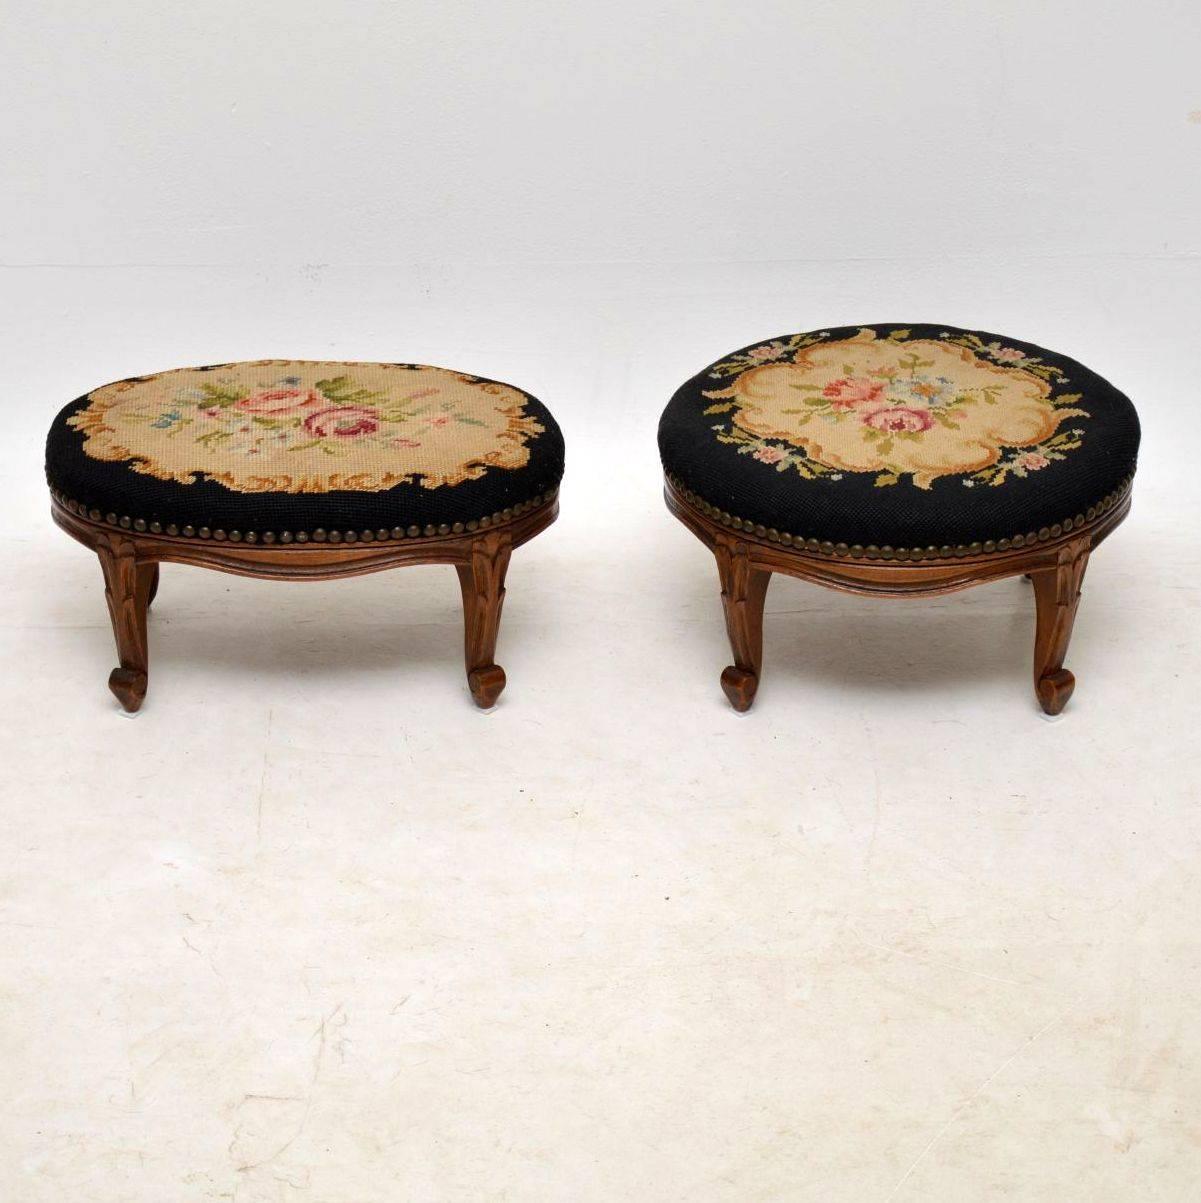 Matching pair of antique foot stools, one oval and one round in good original condition. I believe they are over 100 years old, probably from the 1880-90’s period with carved cabriole legs. The needlepoint upholstery looks original to the stools &